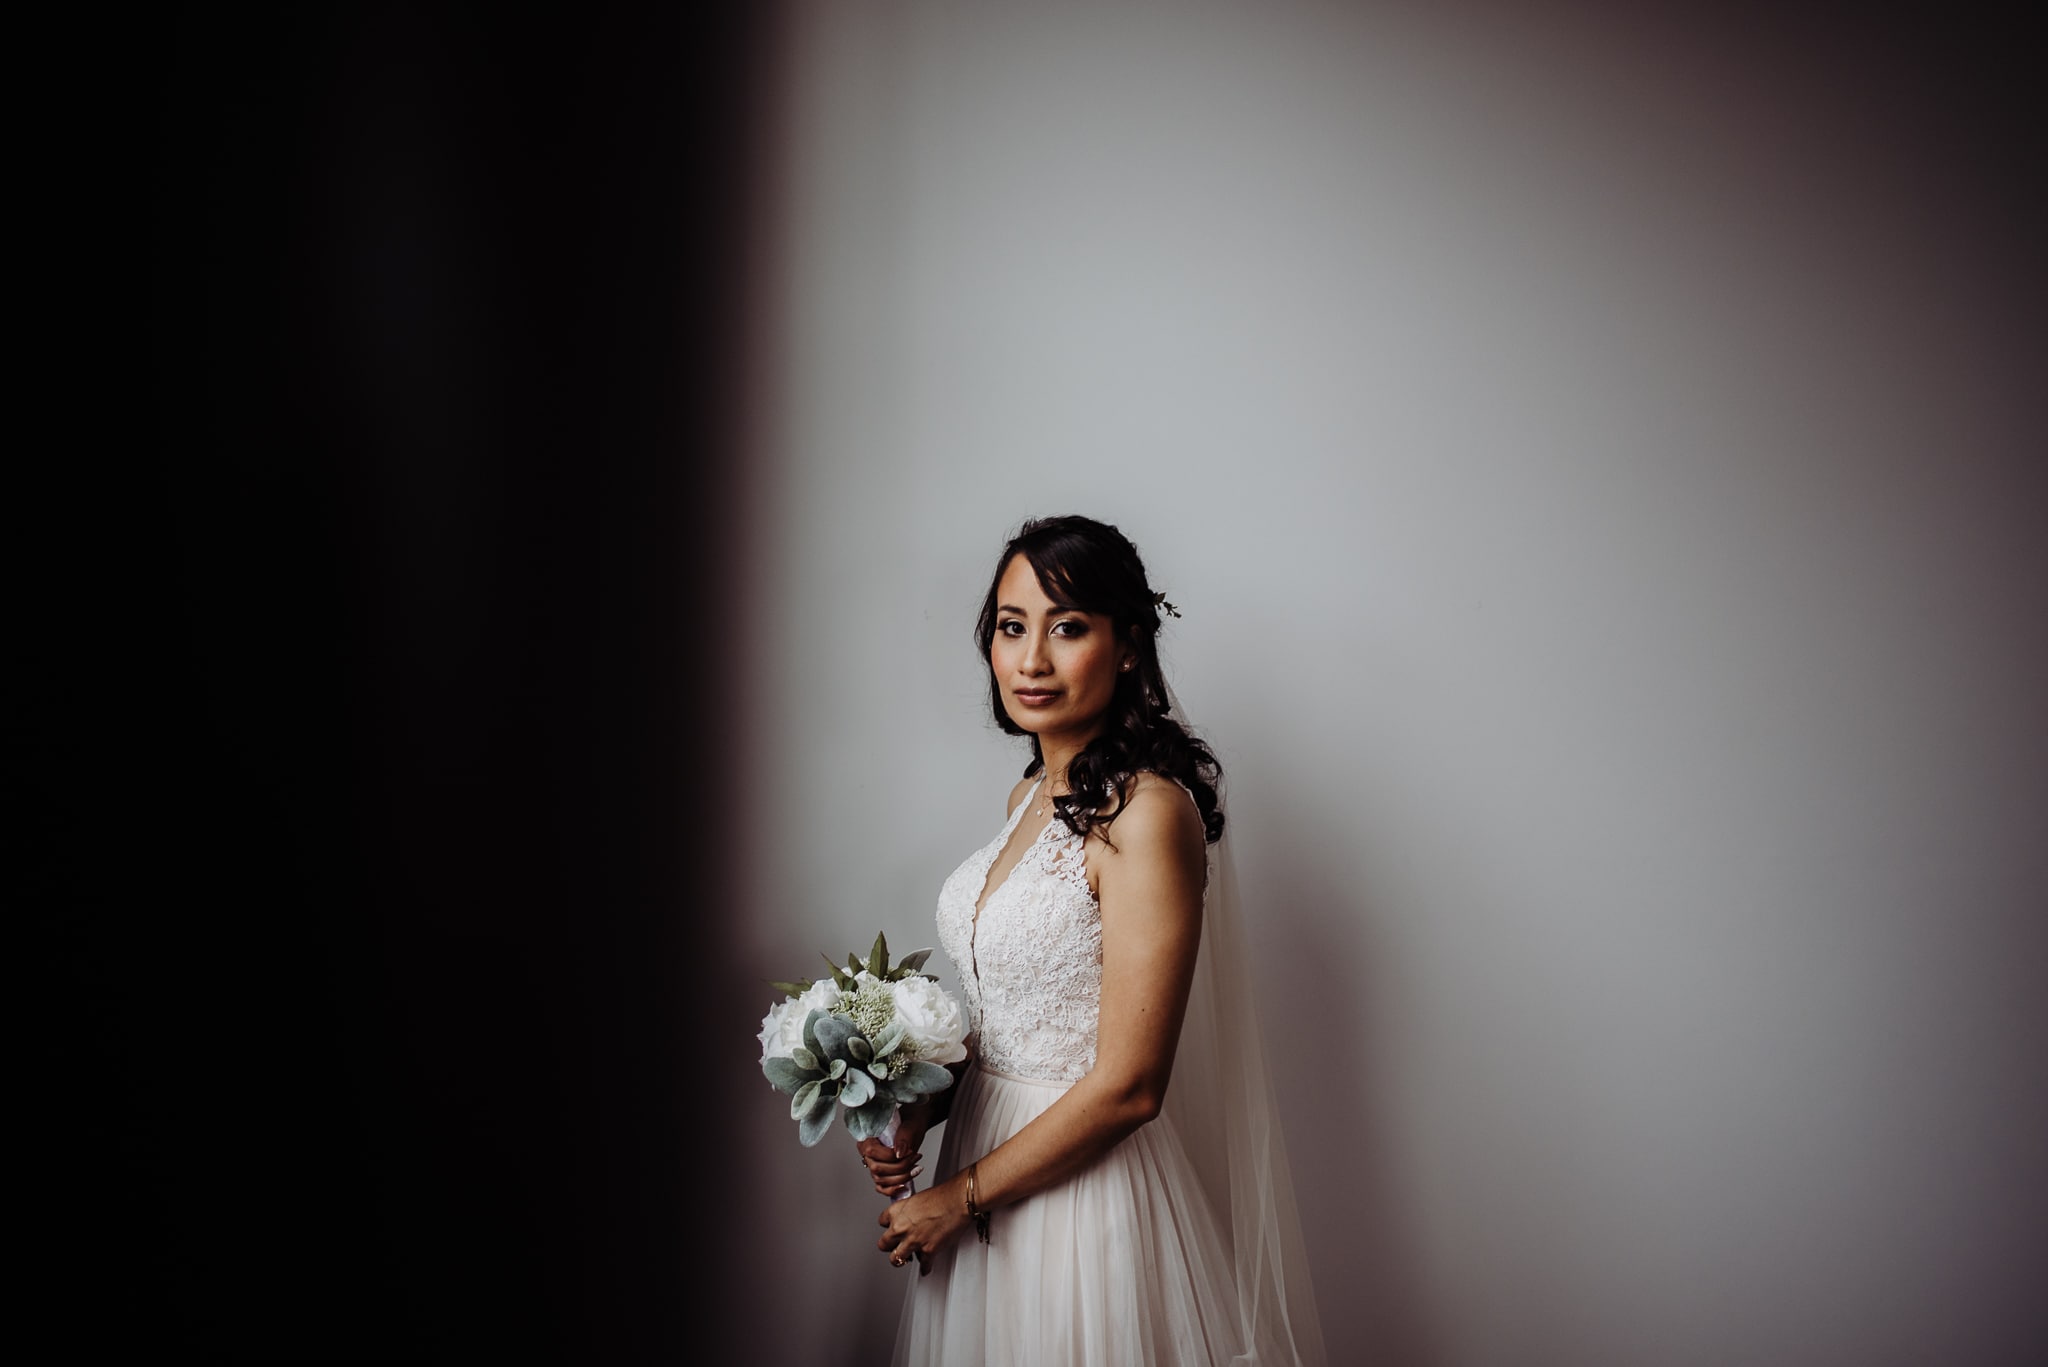 Simplistic bridal wedding photography in dover